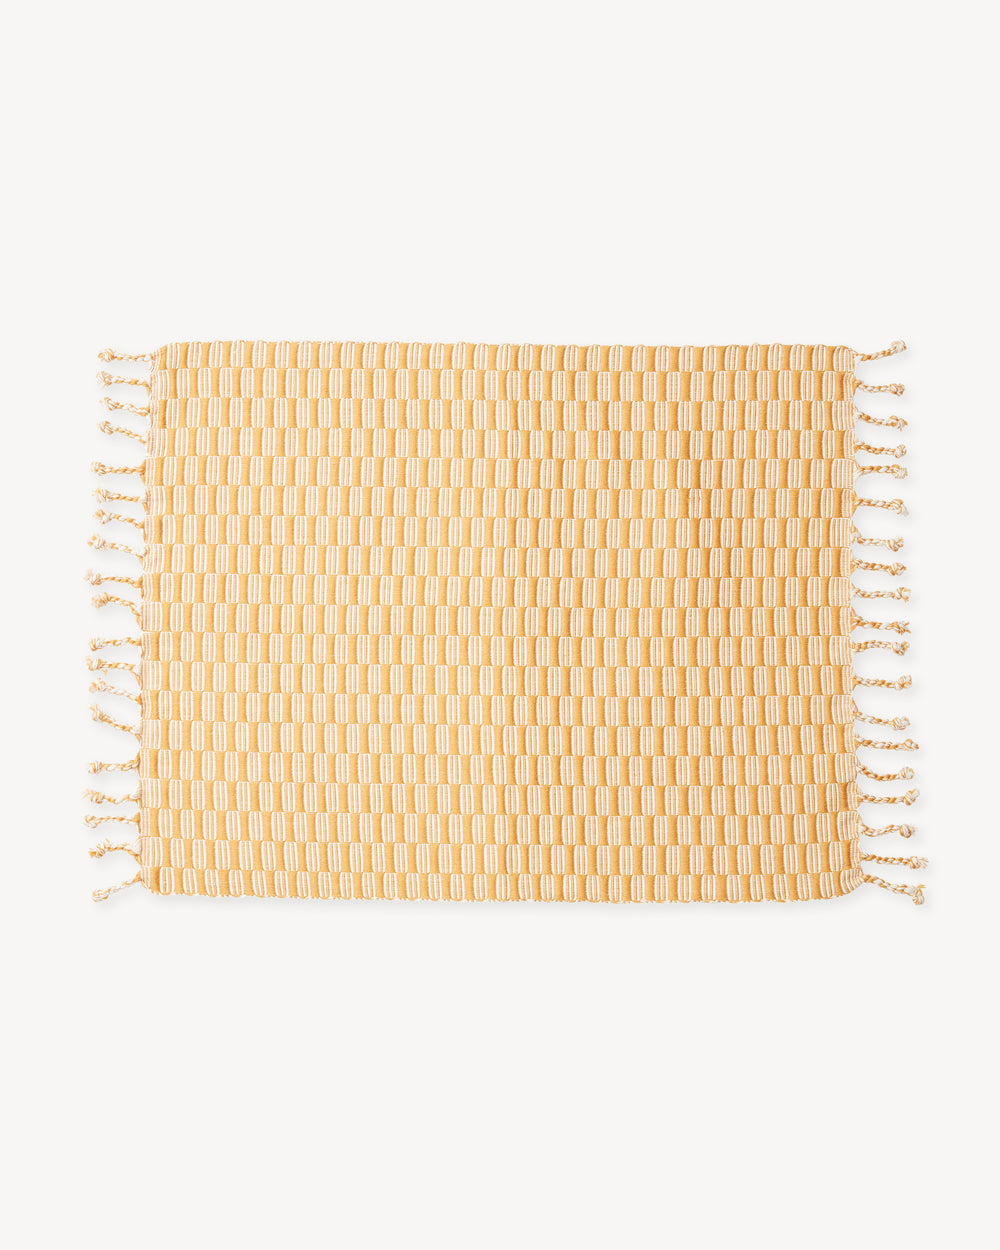 Panalito Placemat - Gold